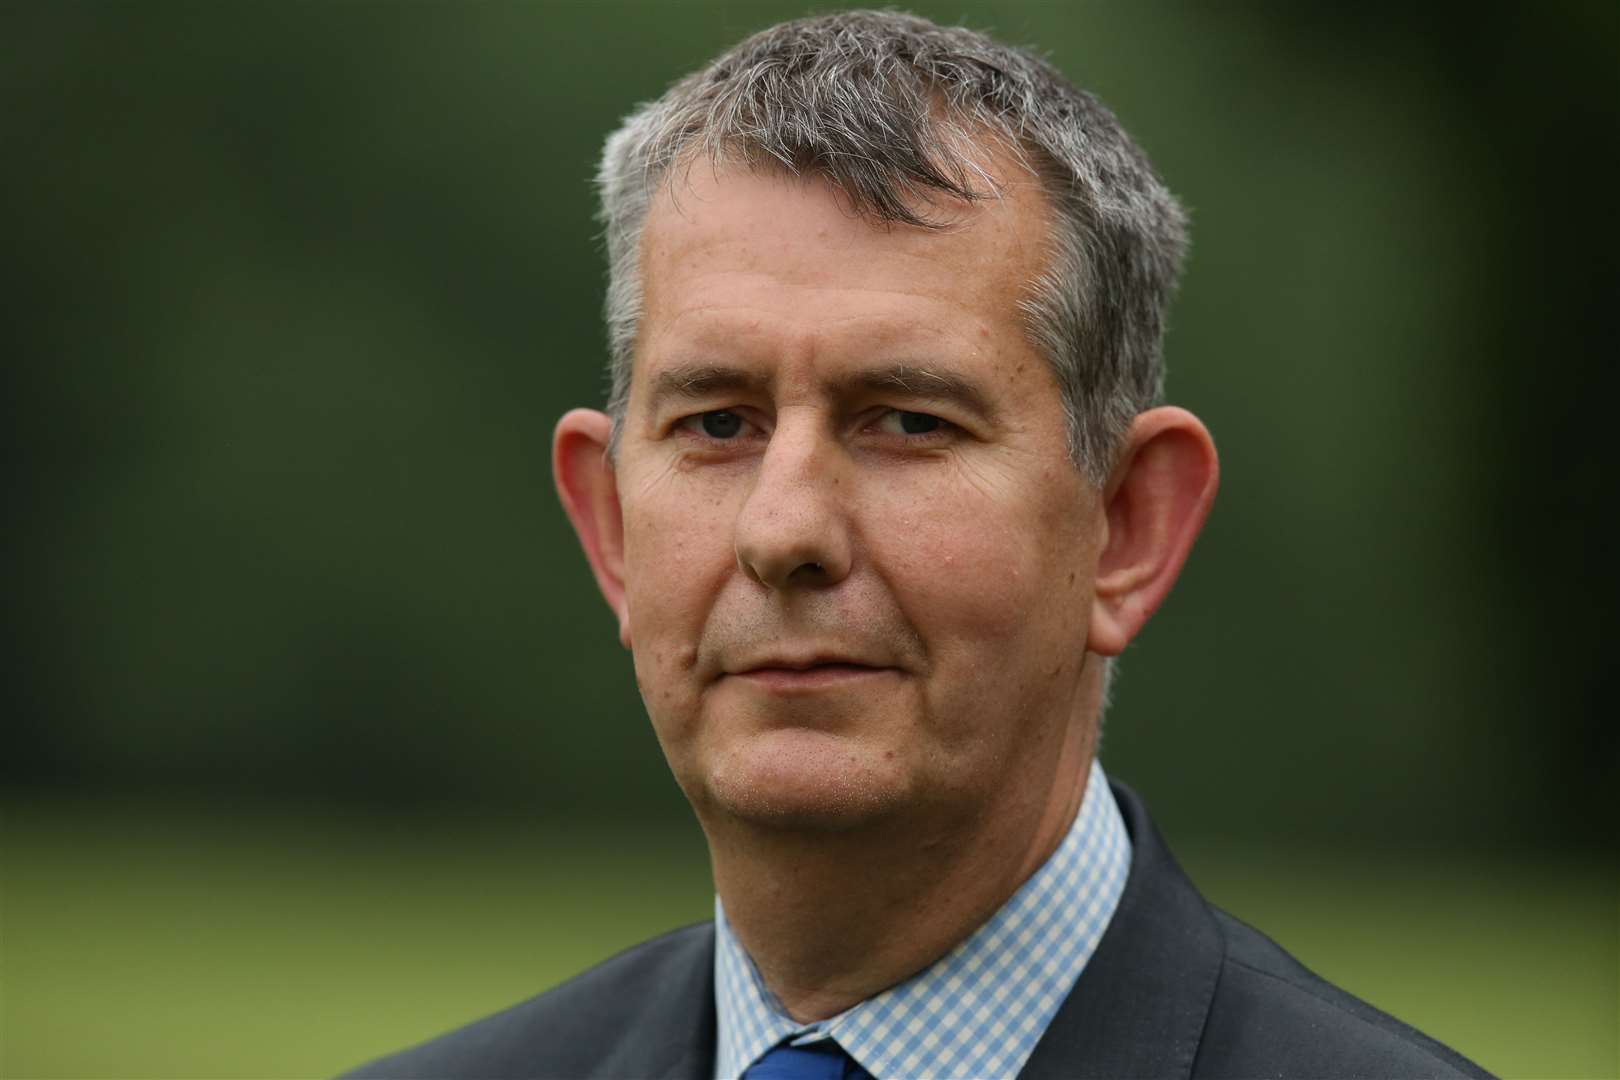 Processed goods like jelly or gravy could be unavailable in Northern Ireland at the end of the protocol grace period, the party’s Stormont agriculture minister Edwin Poots said (Niall Carson/PA).